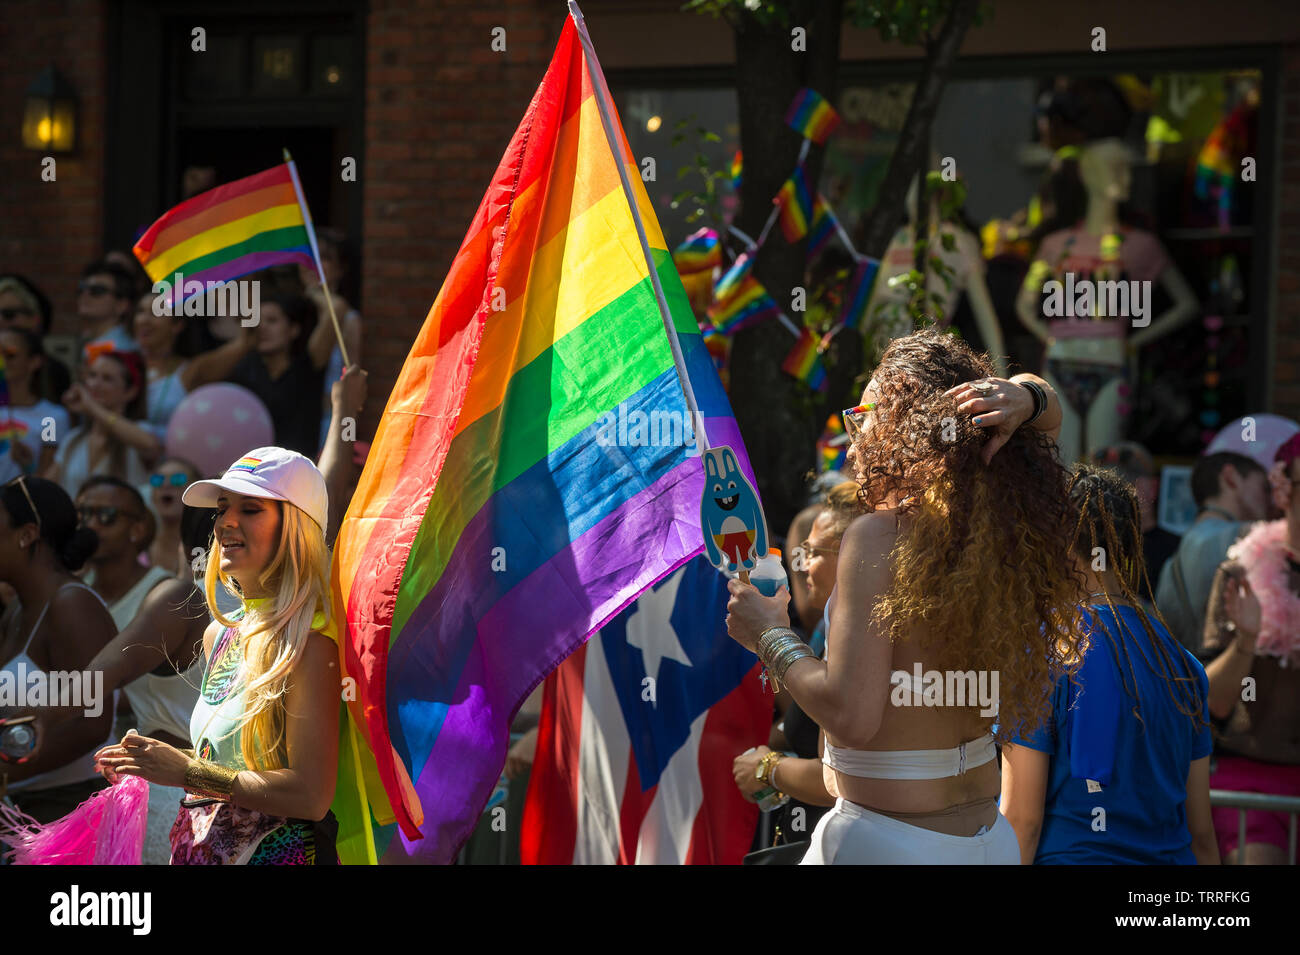 NEW YORK CITY - JUNE 25, 2017: Participants wave rainbow and Puerto Rican flags as the Gay Pride Parade as it passes through Greenwich Village. Stock Photo